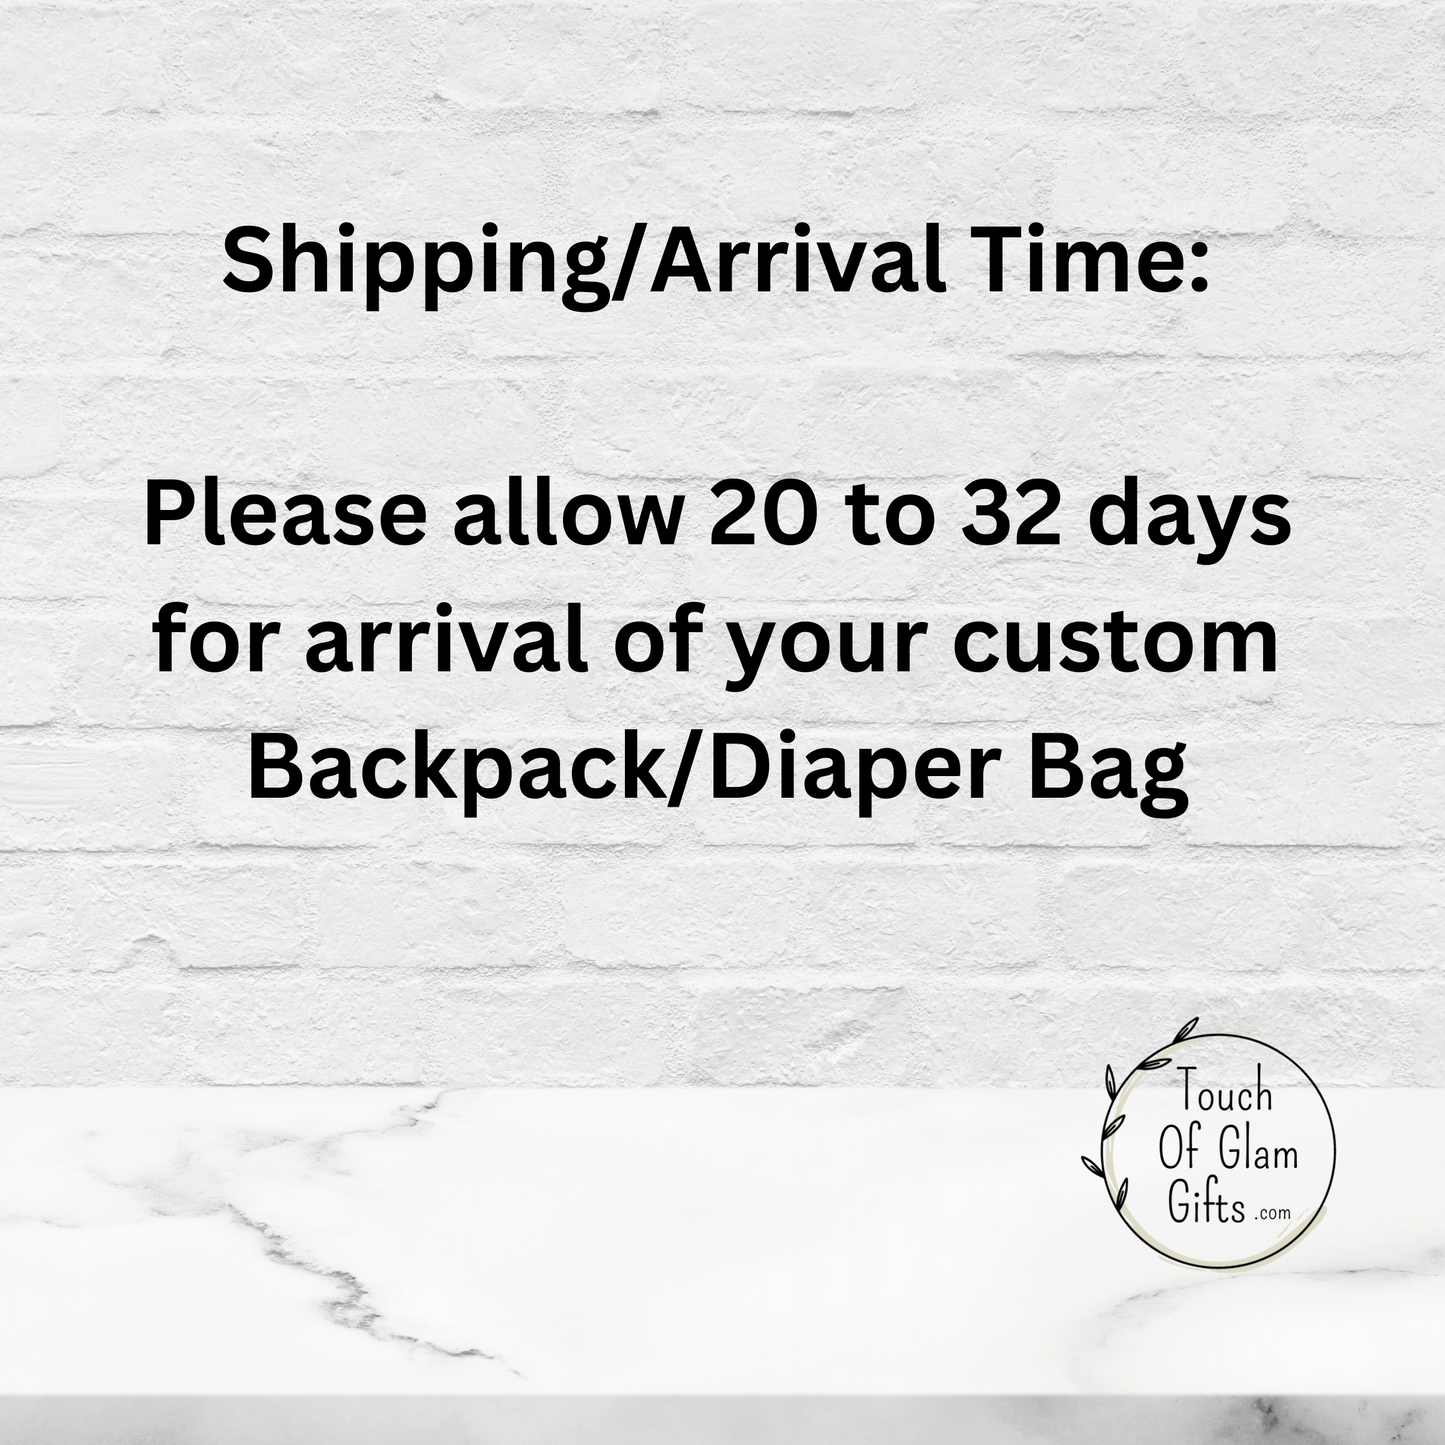 SHipping arrival time is between twenty and thirty two days.